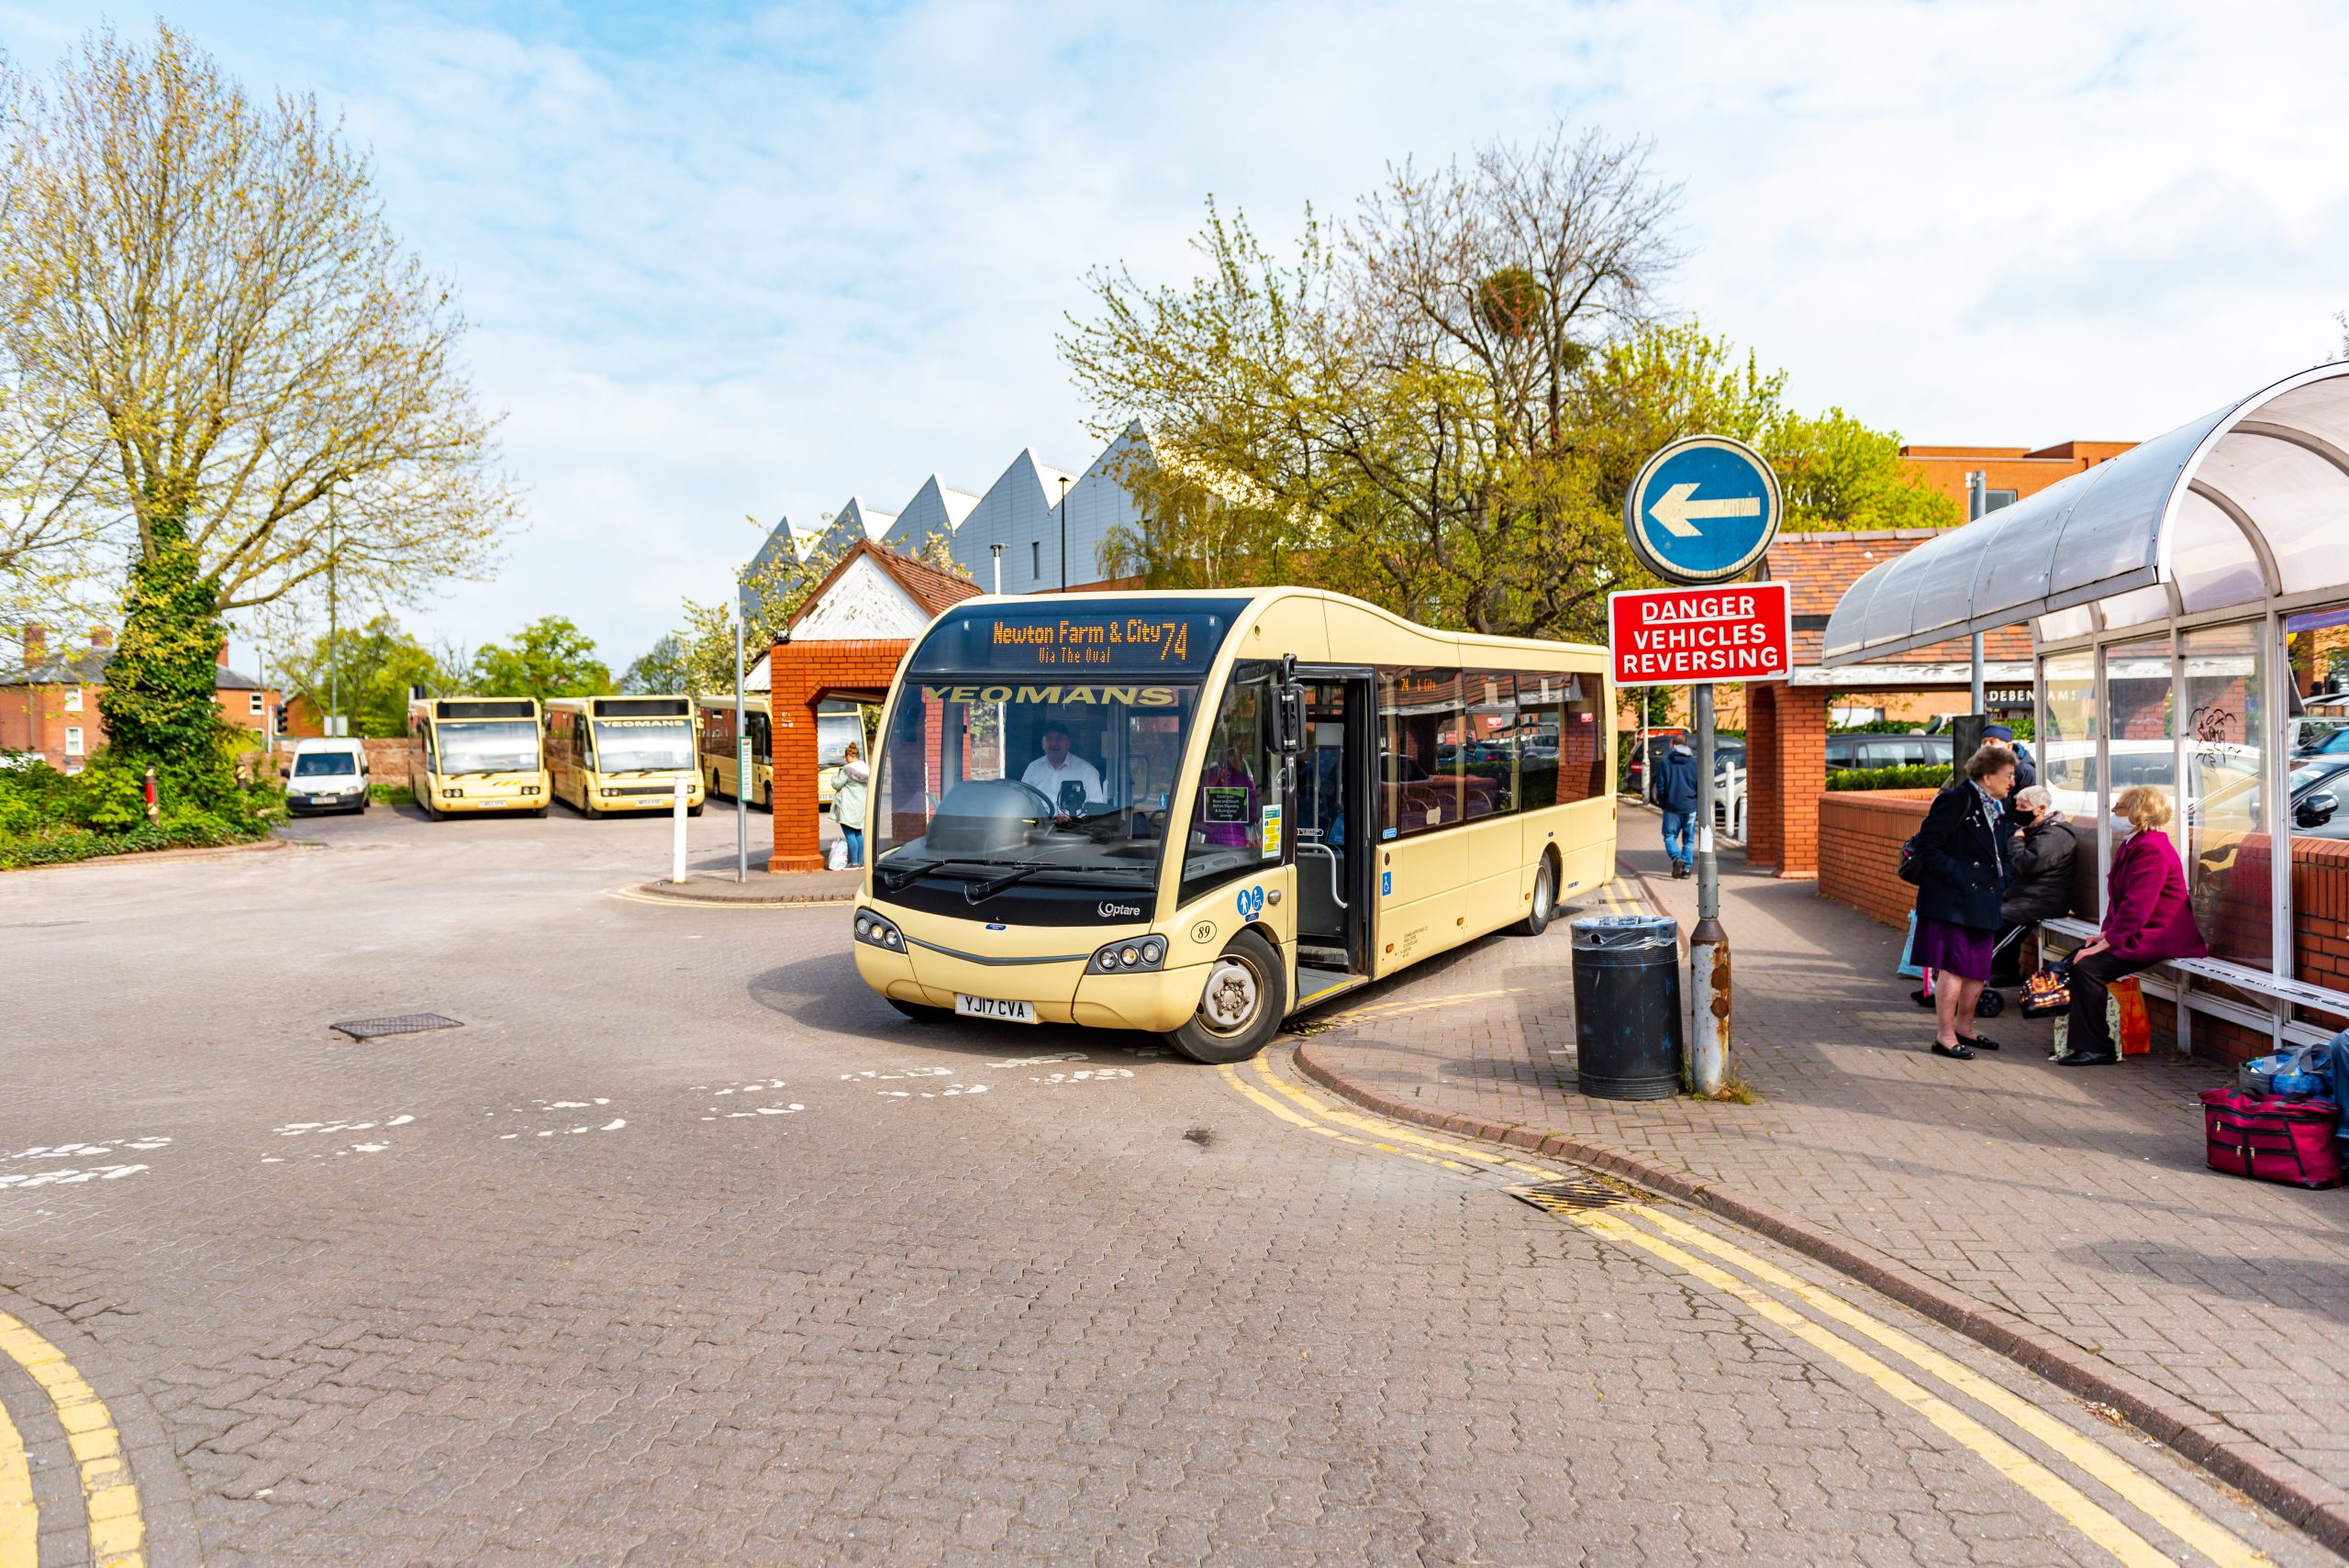 NEWS | A number of bus services in Herefordshire are cancelled today due to staff shortages – FULL LIST